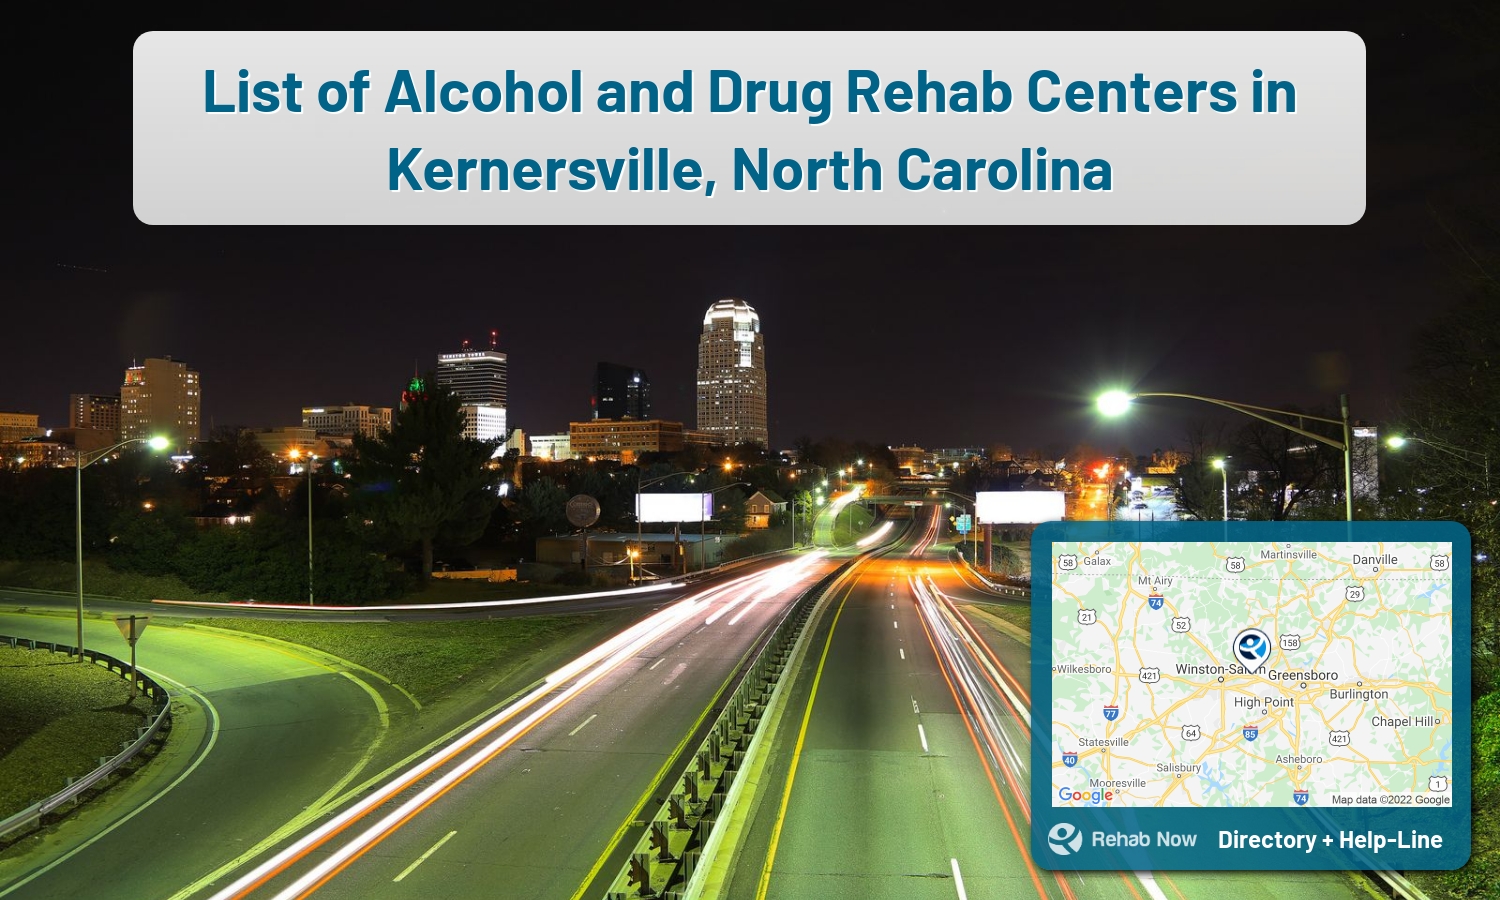 List of alcohol and drug treatment centers near you in Kernersville, North Carolina. Research certifications, programs, methods, pricing, and more.